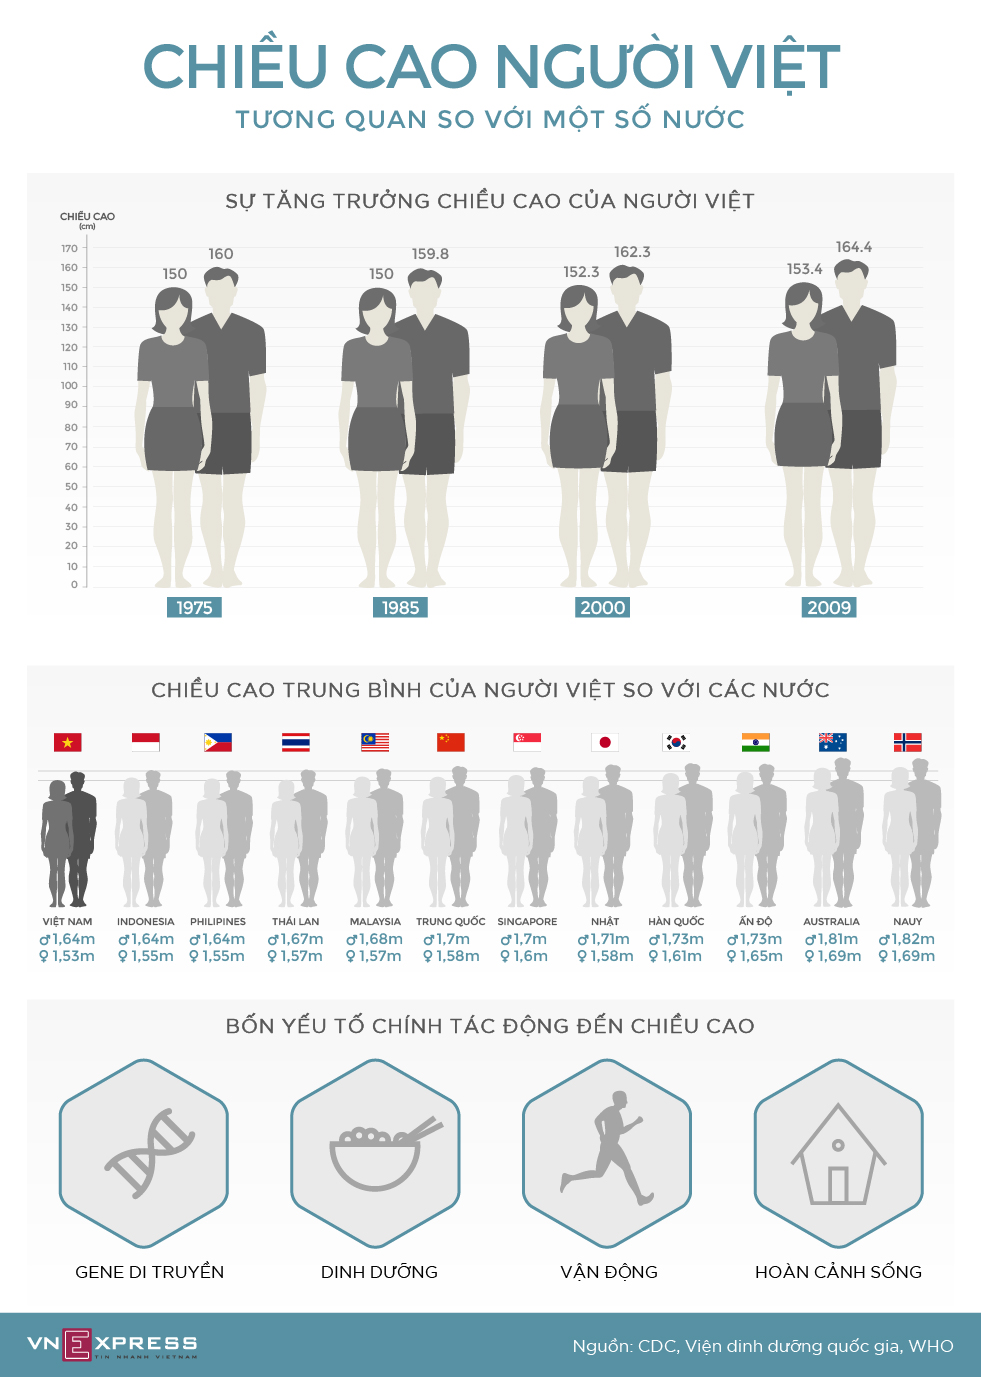 Vietnamese's average height increases insignificantly after a